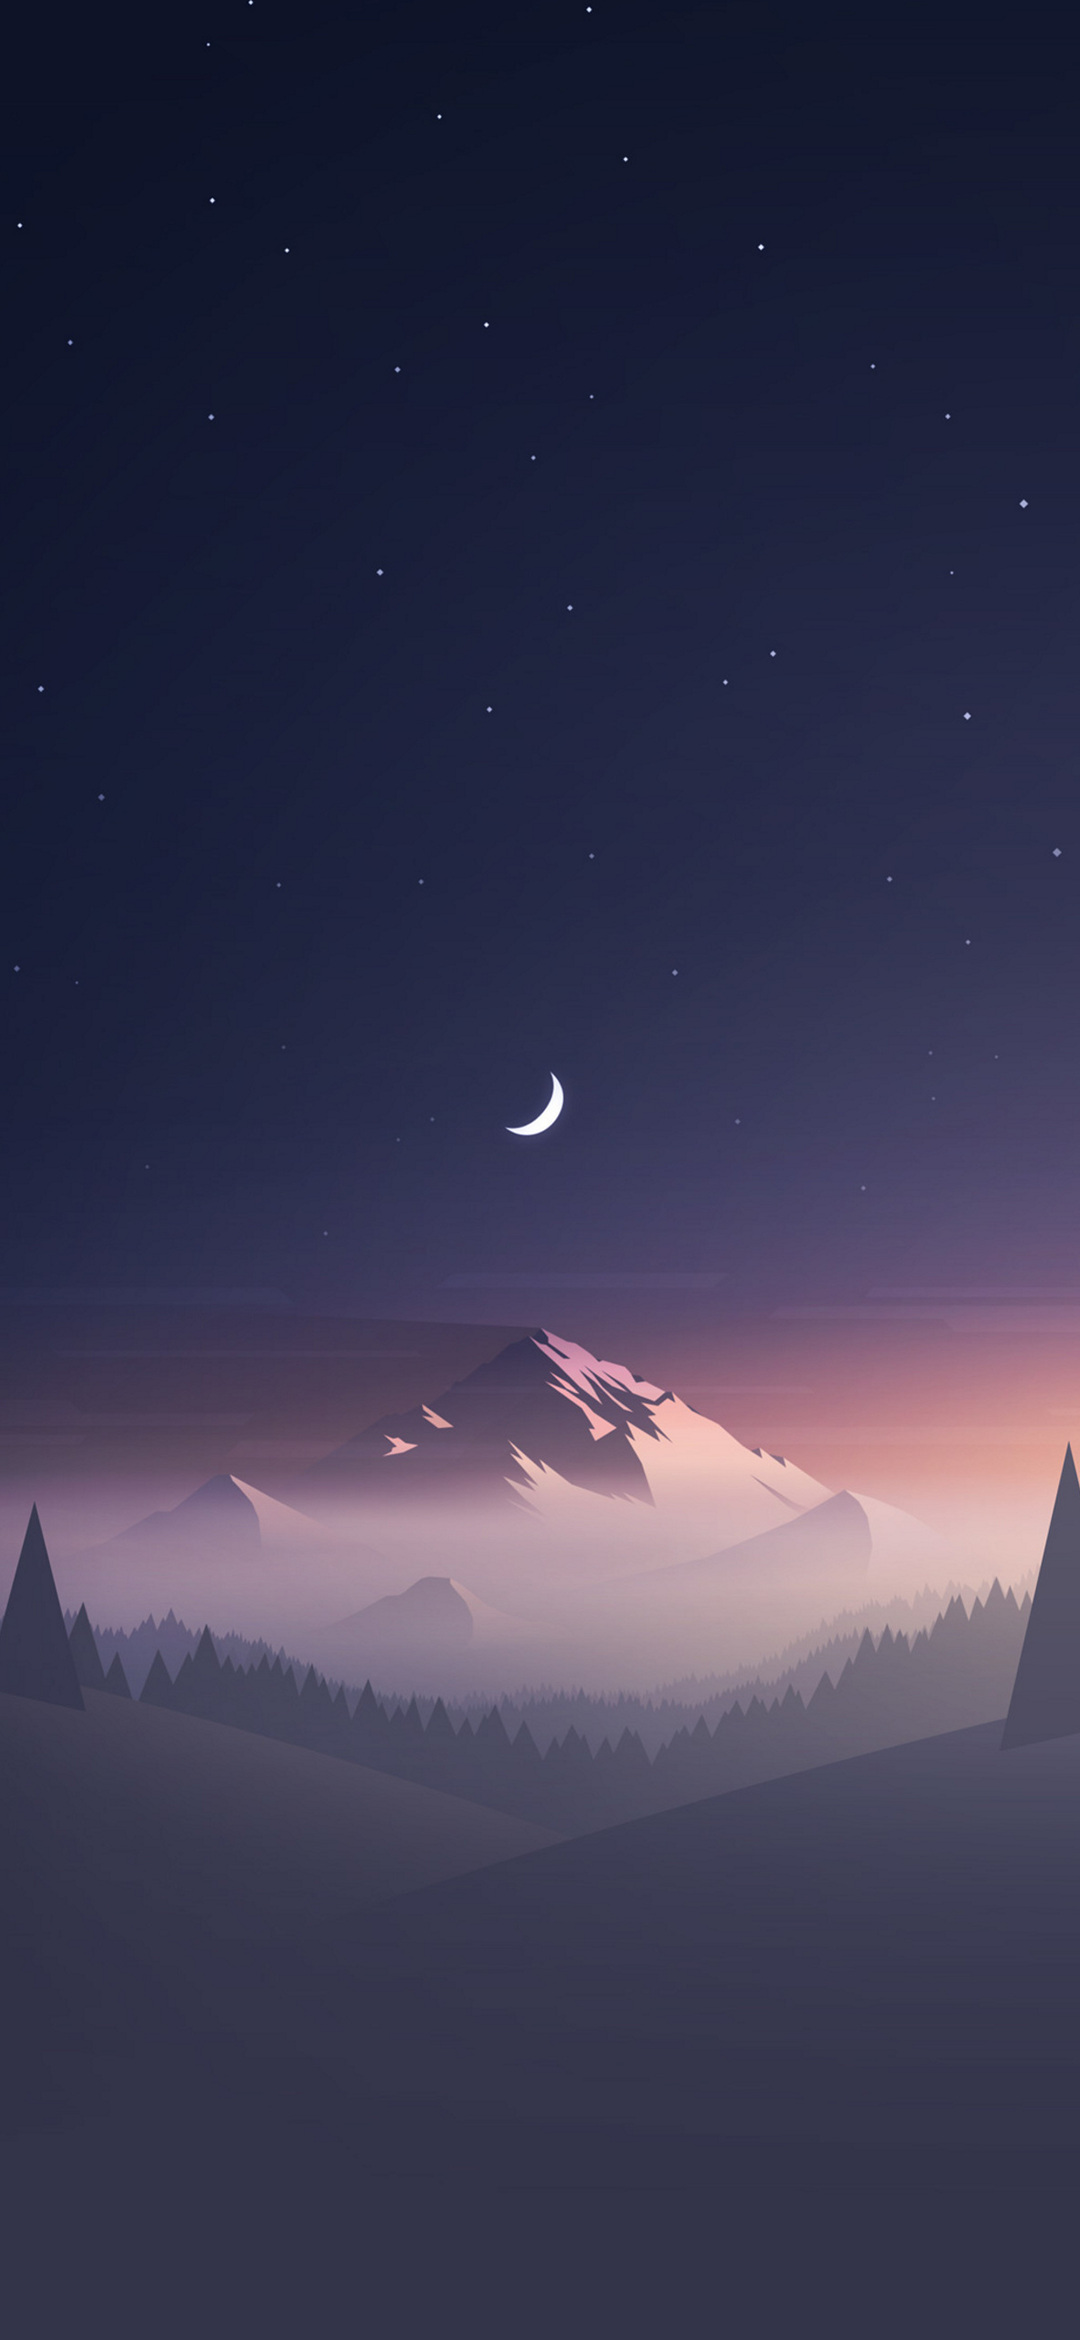 Illustration Of A Beautiful Starry Sky Crescent Moon And Snowy Mountains Redmi 9t Android スマホ壁紙 待ち受け スマラン